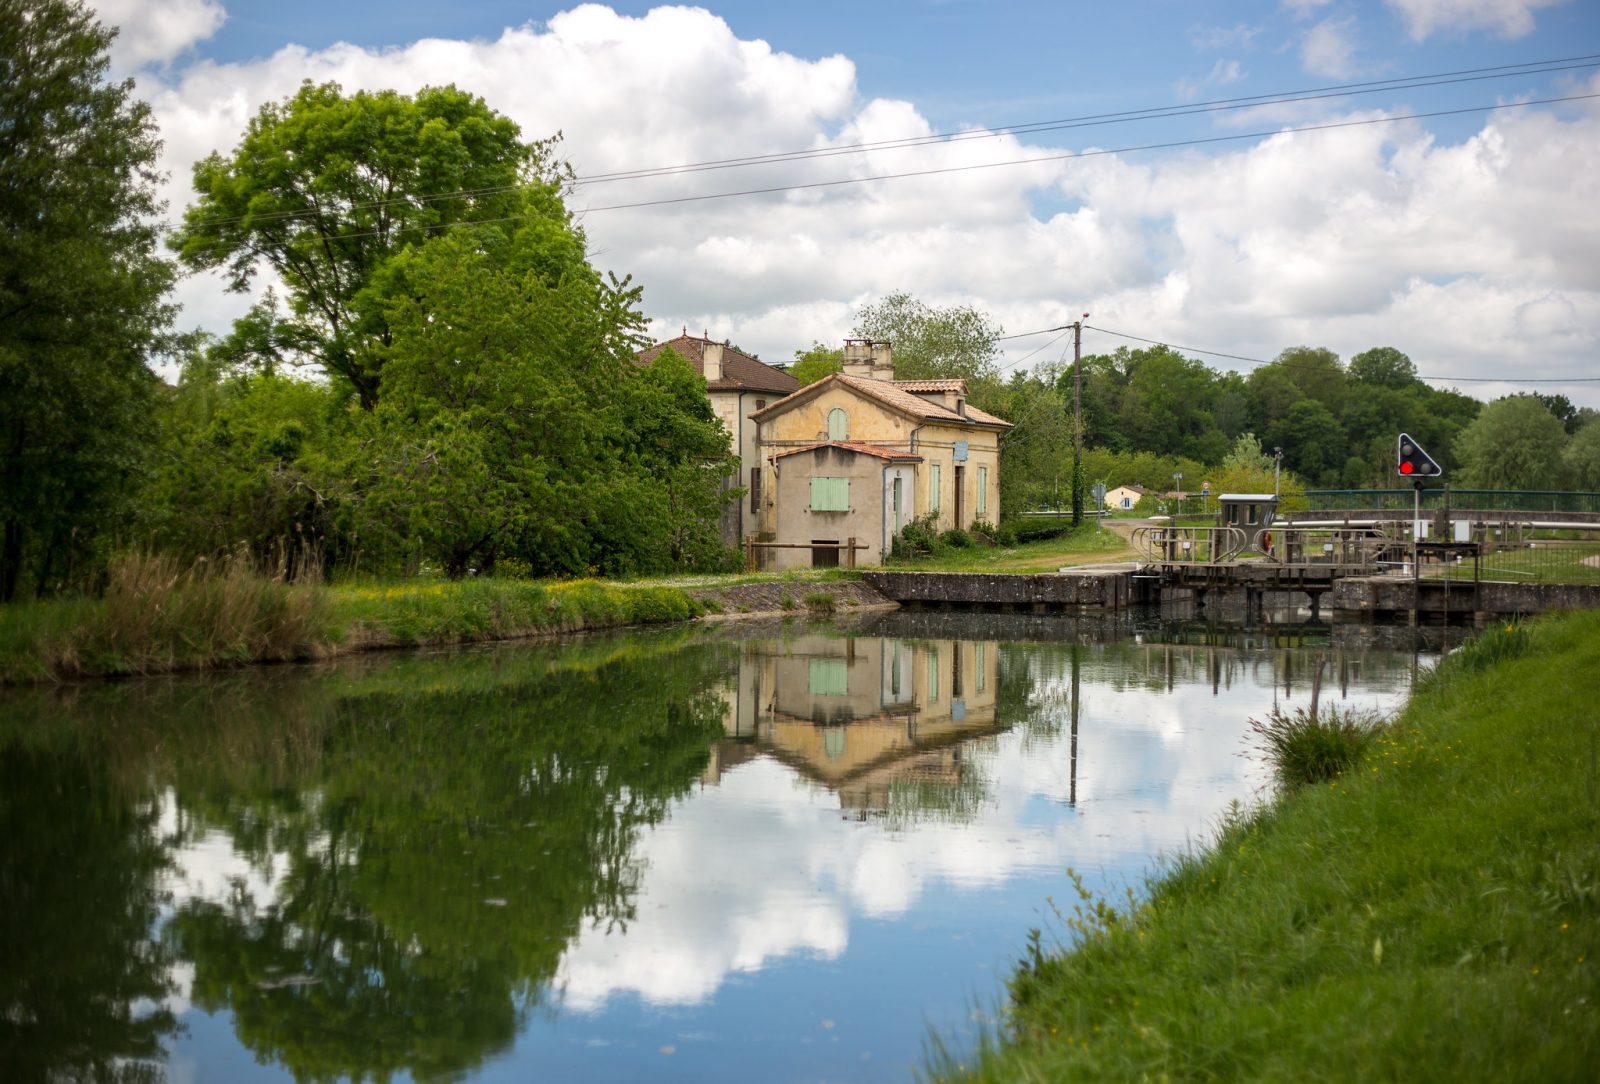 The Canal des 2 Mers by bike in Gironde